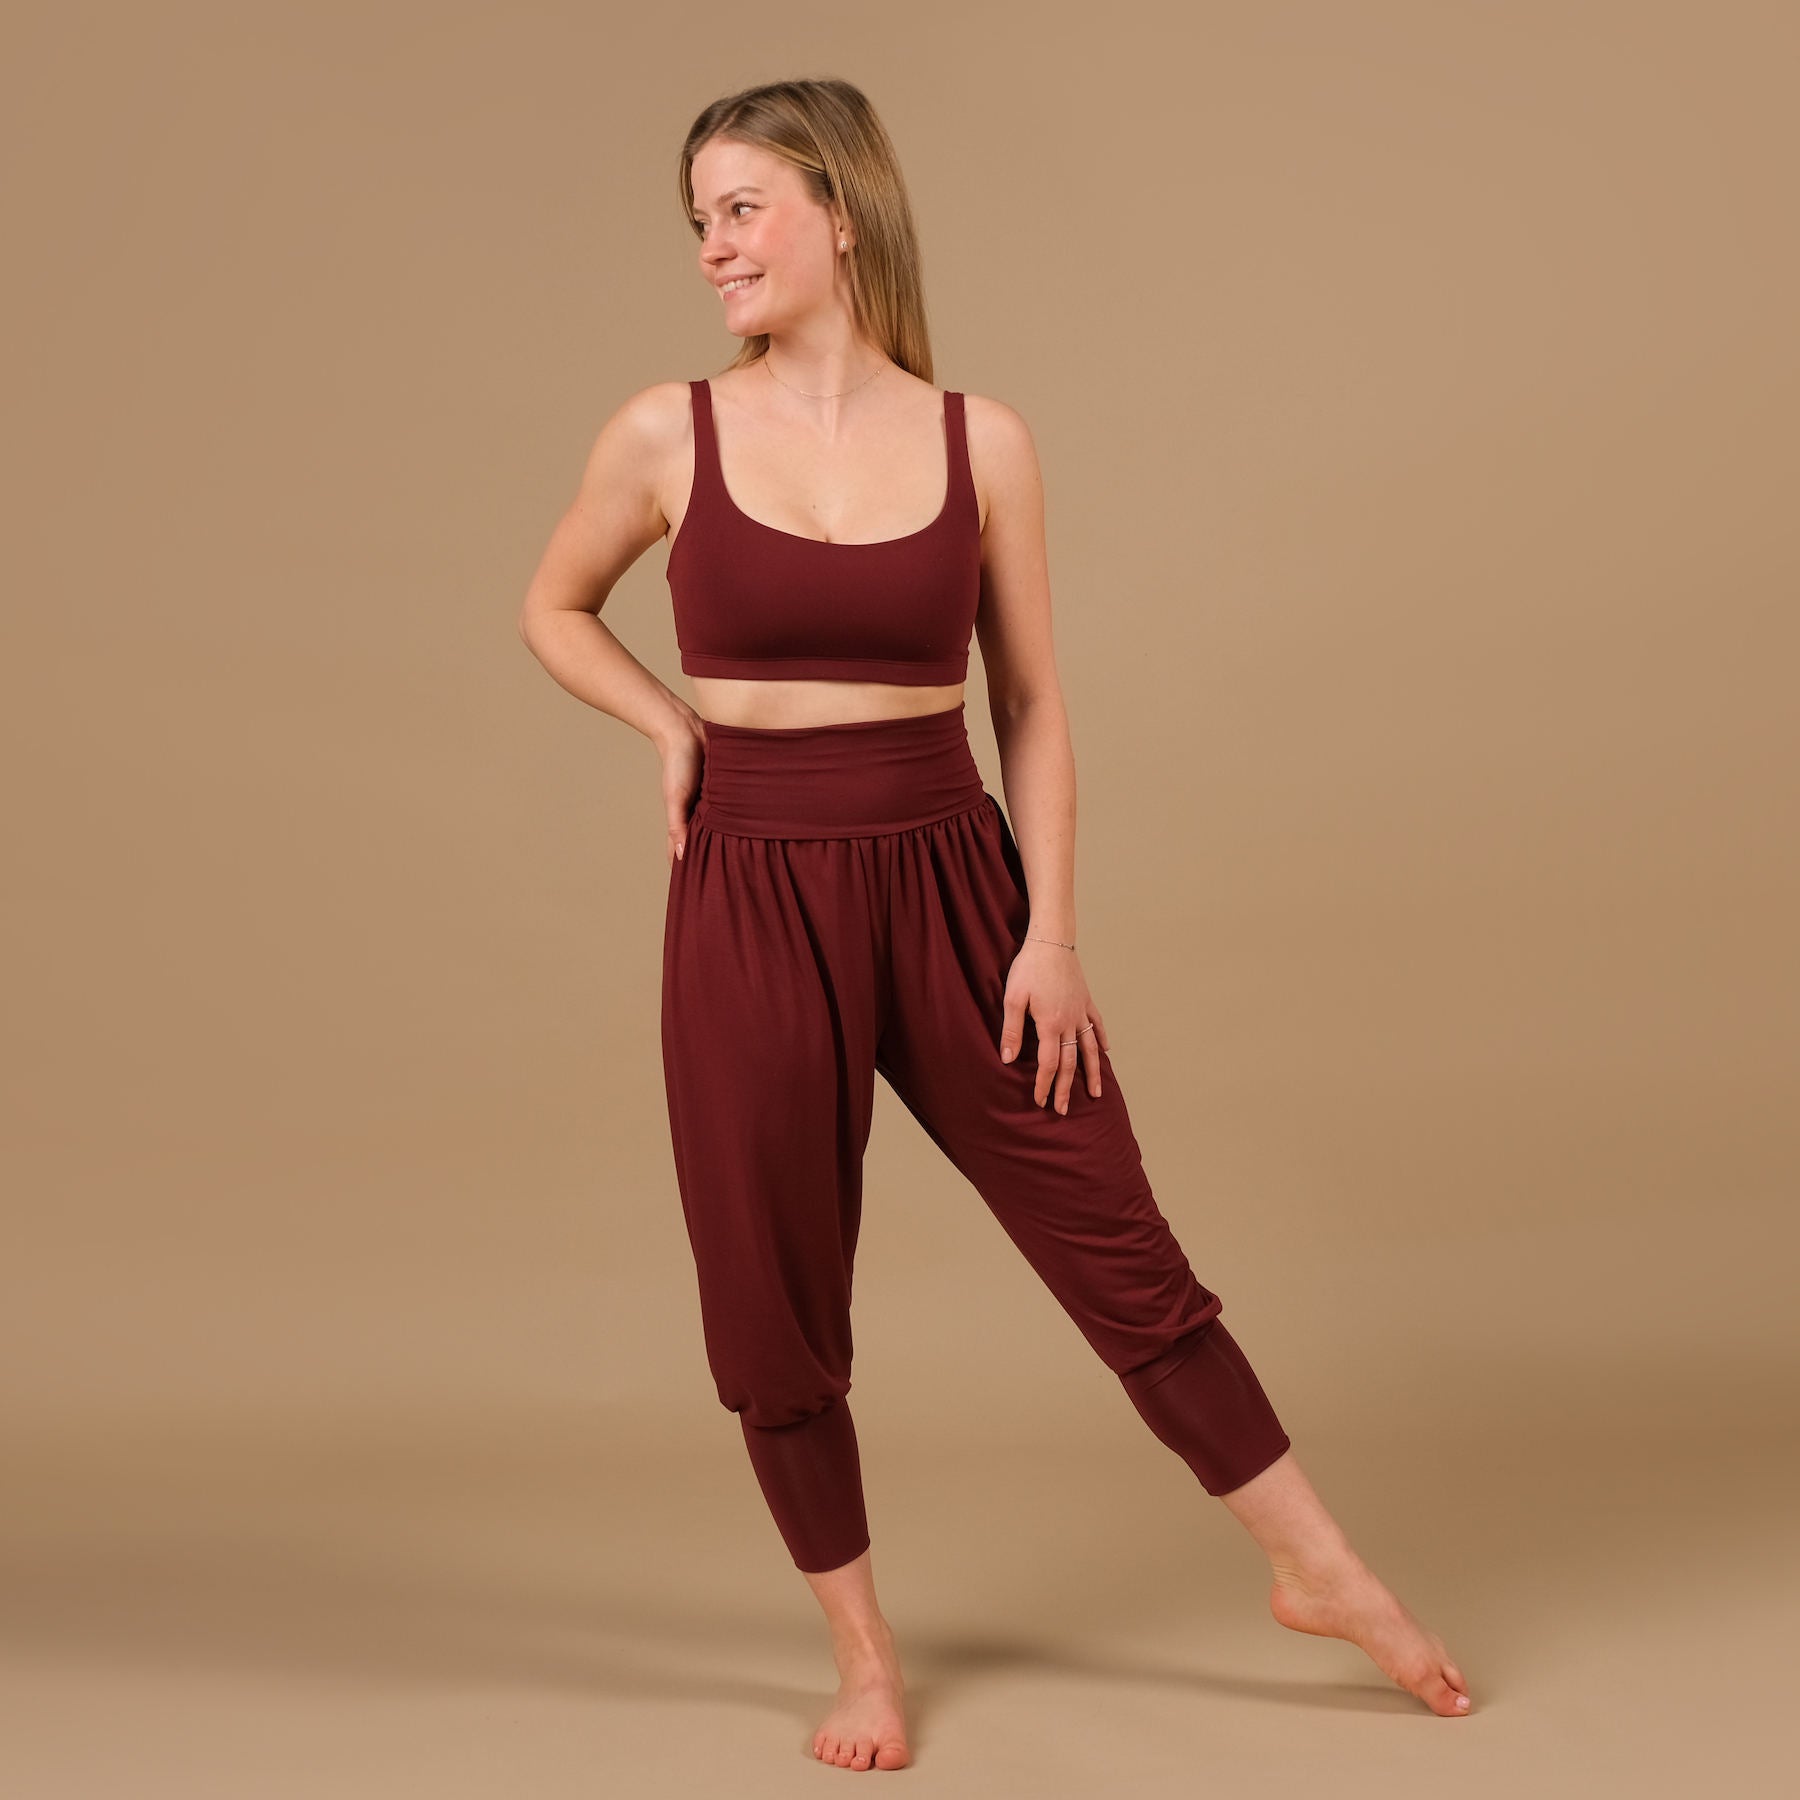 Yoga Bra Comfy bordeaux, durable, made in Switzerland